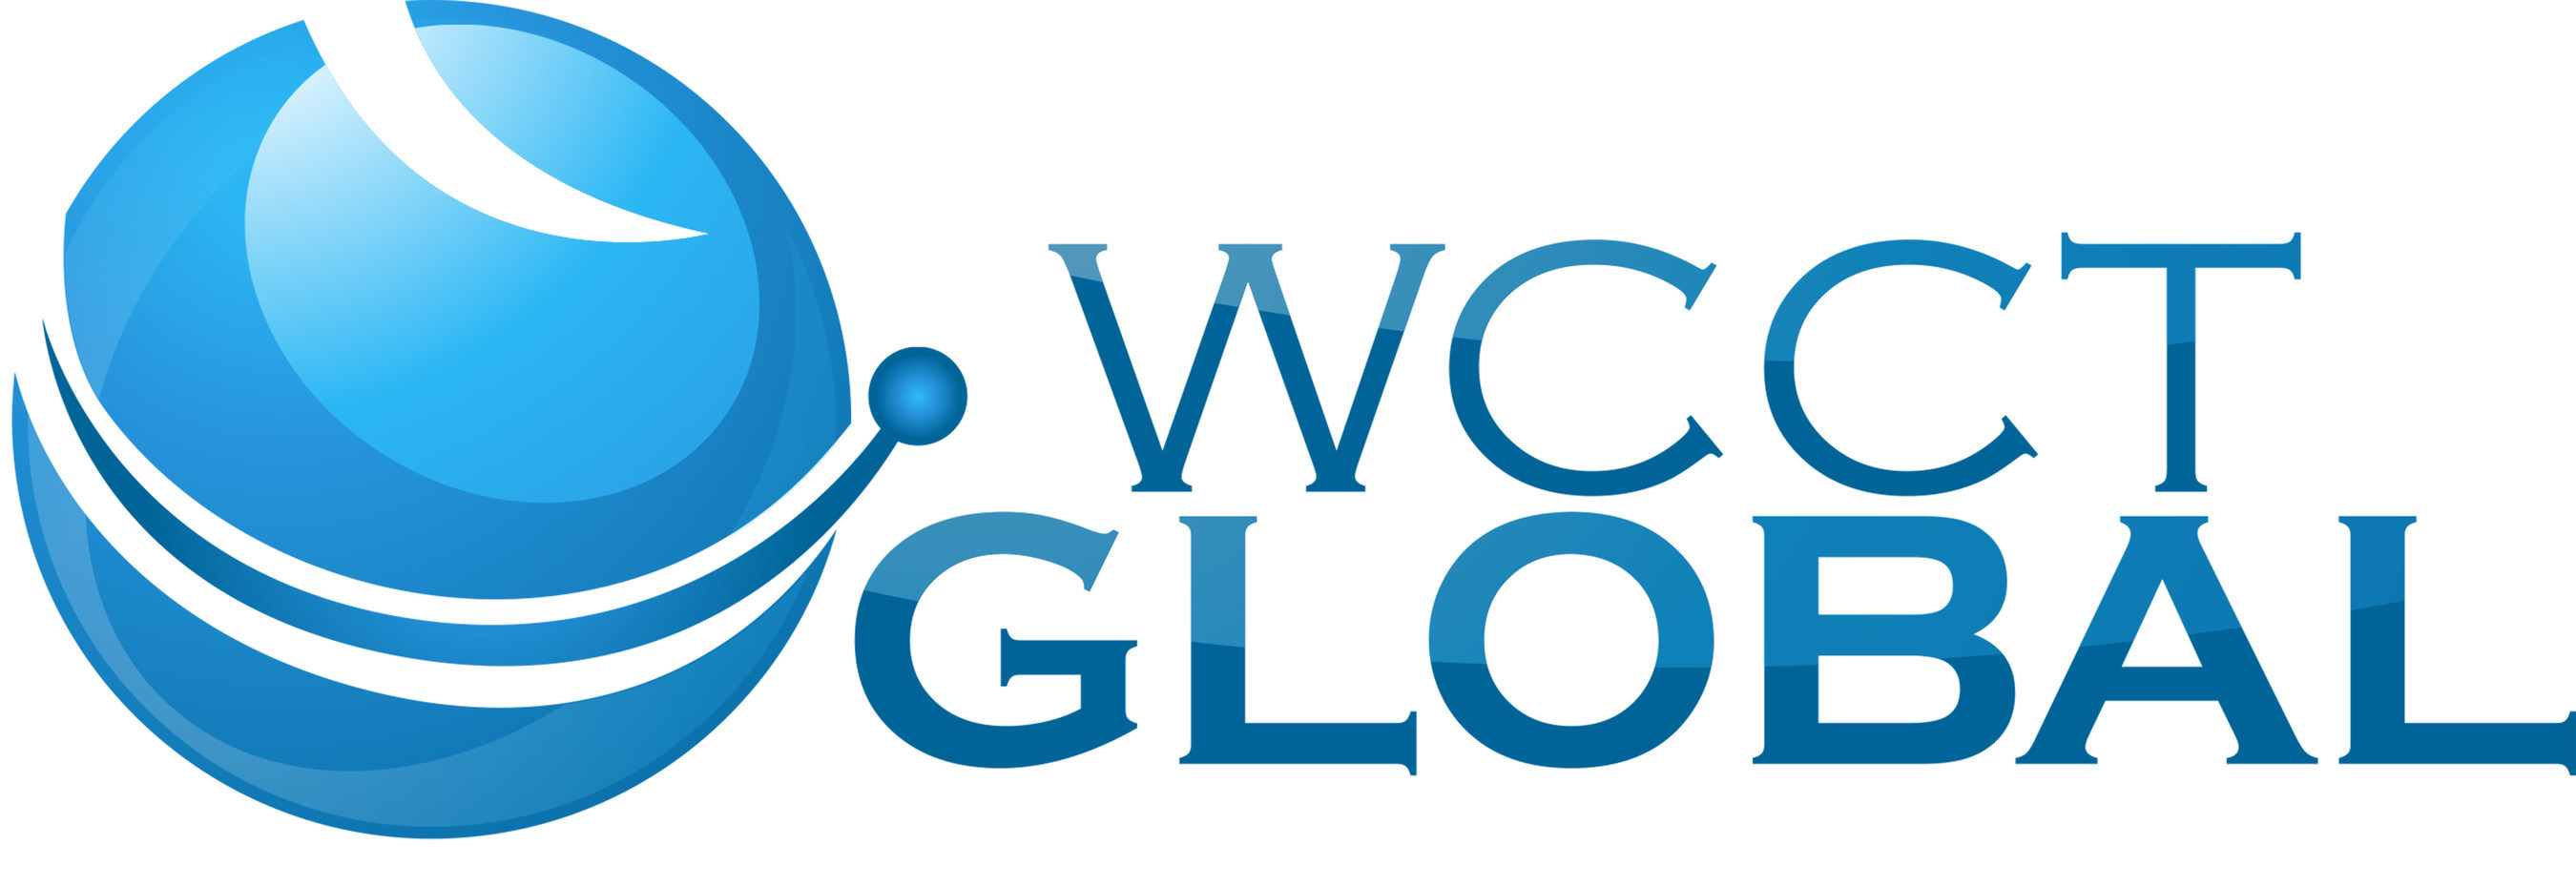 WCCT Global, Inc., a multisite, full-service contract research organization (CRO) specializing in research services to the pharmaceutical, biotechnology and medical device industries, announces that Melton Affrime is appointed President and David Charlot appointed CEO.